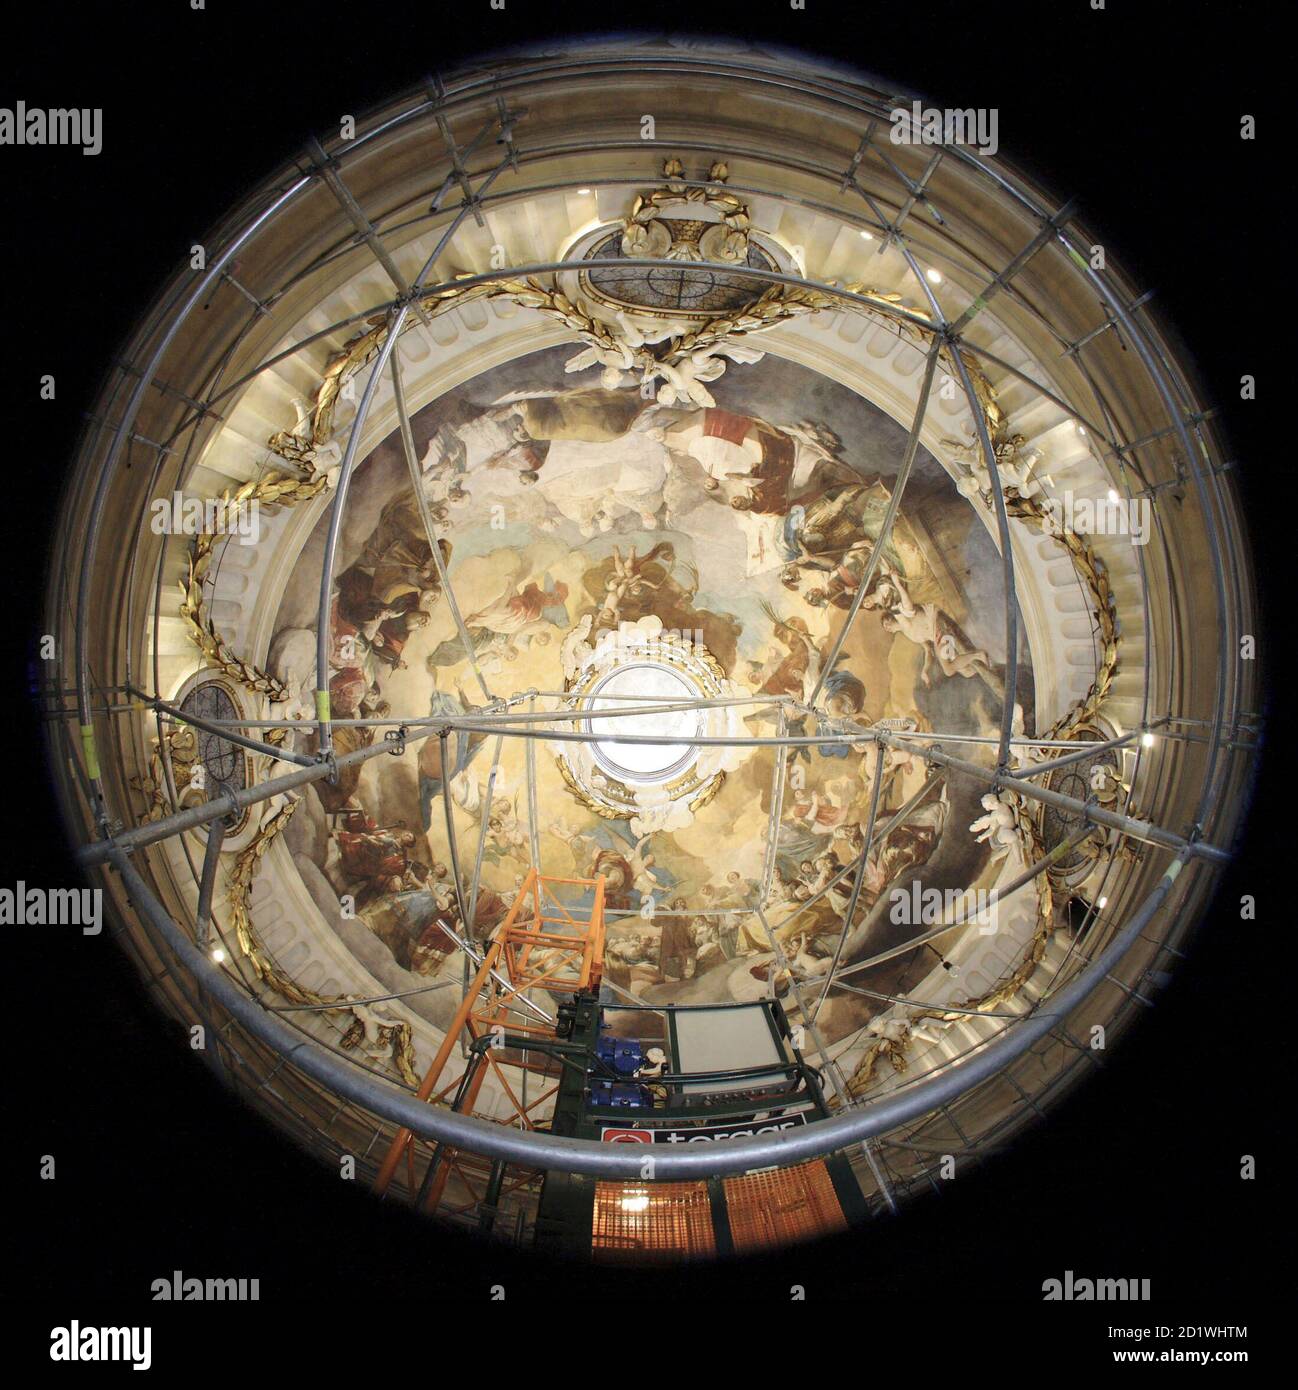 Restored paintings of Francisco de Goya are seen on the dome of the  Basilica del Pilar in central Zaragoza, March 29, 2007. Picture taken with  a fisheye lens. REUTERS/Luis Correas (SPAIN Stock